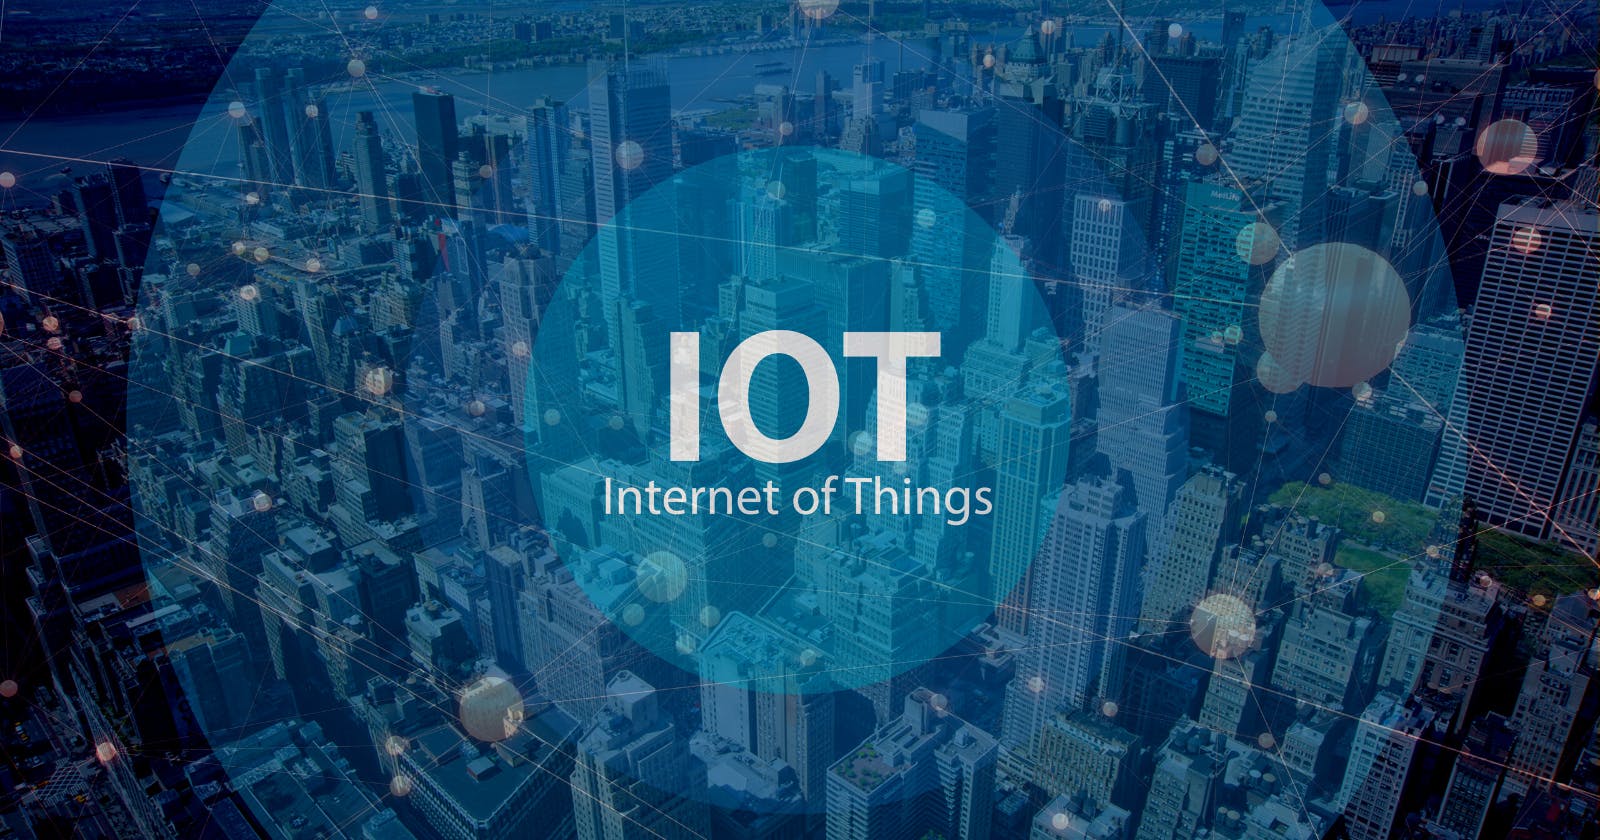 Presear Softwares is set to open up its new branch in Internet of Things (IoT) and automation